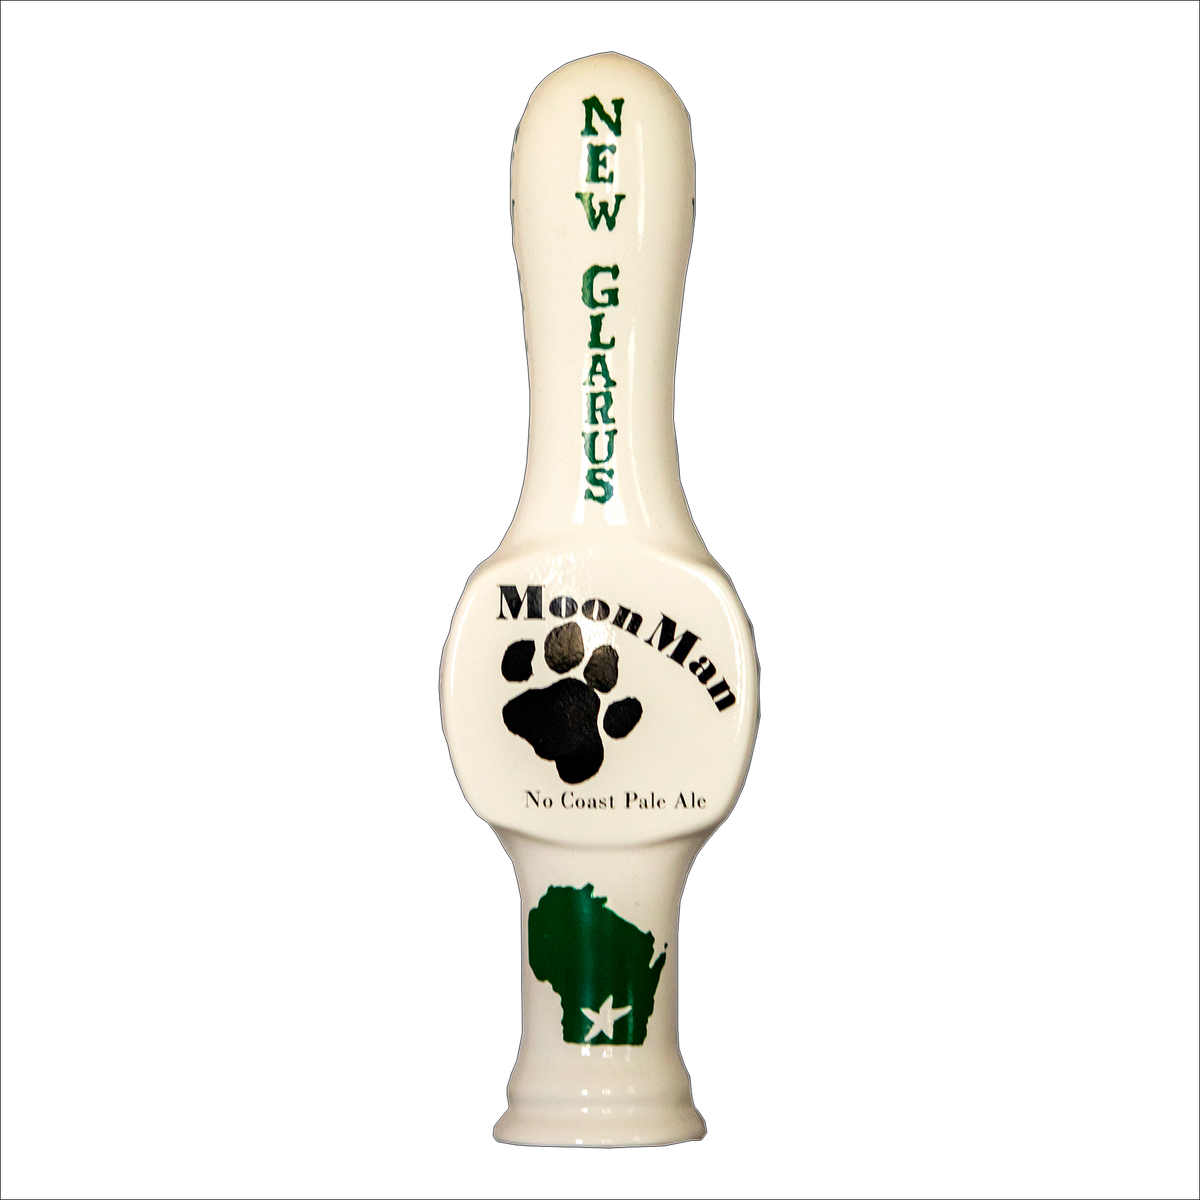 White tap handle with New Glarus written vertically at the top and the Moon Man No Coast Pale Ale logo in black with green states of Wisconsin around the bottom.